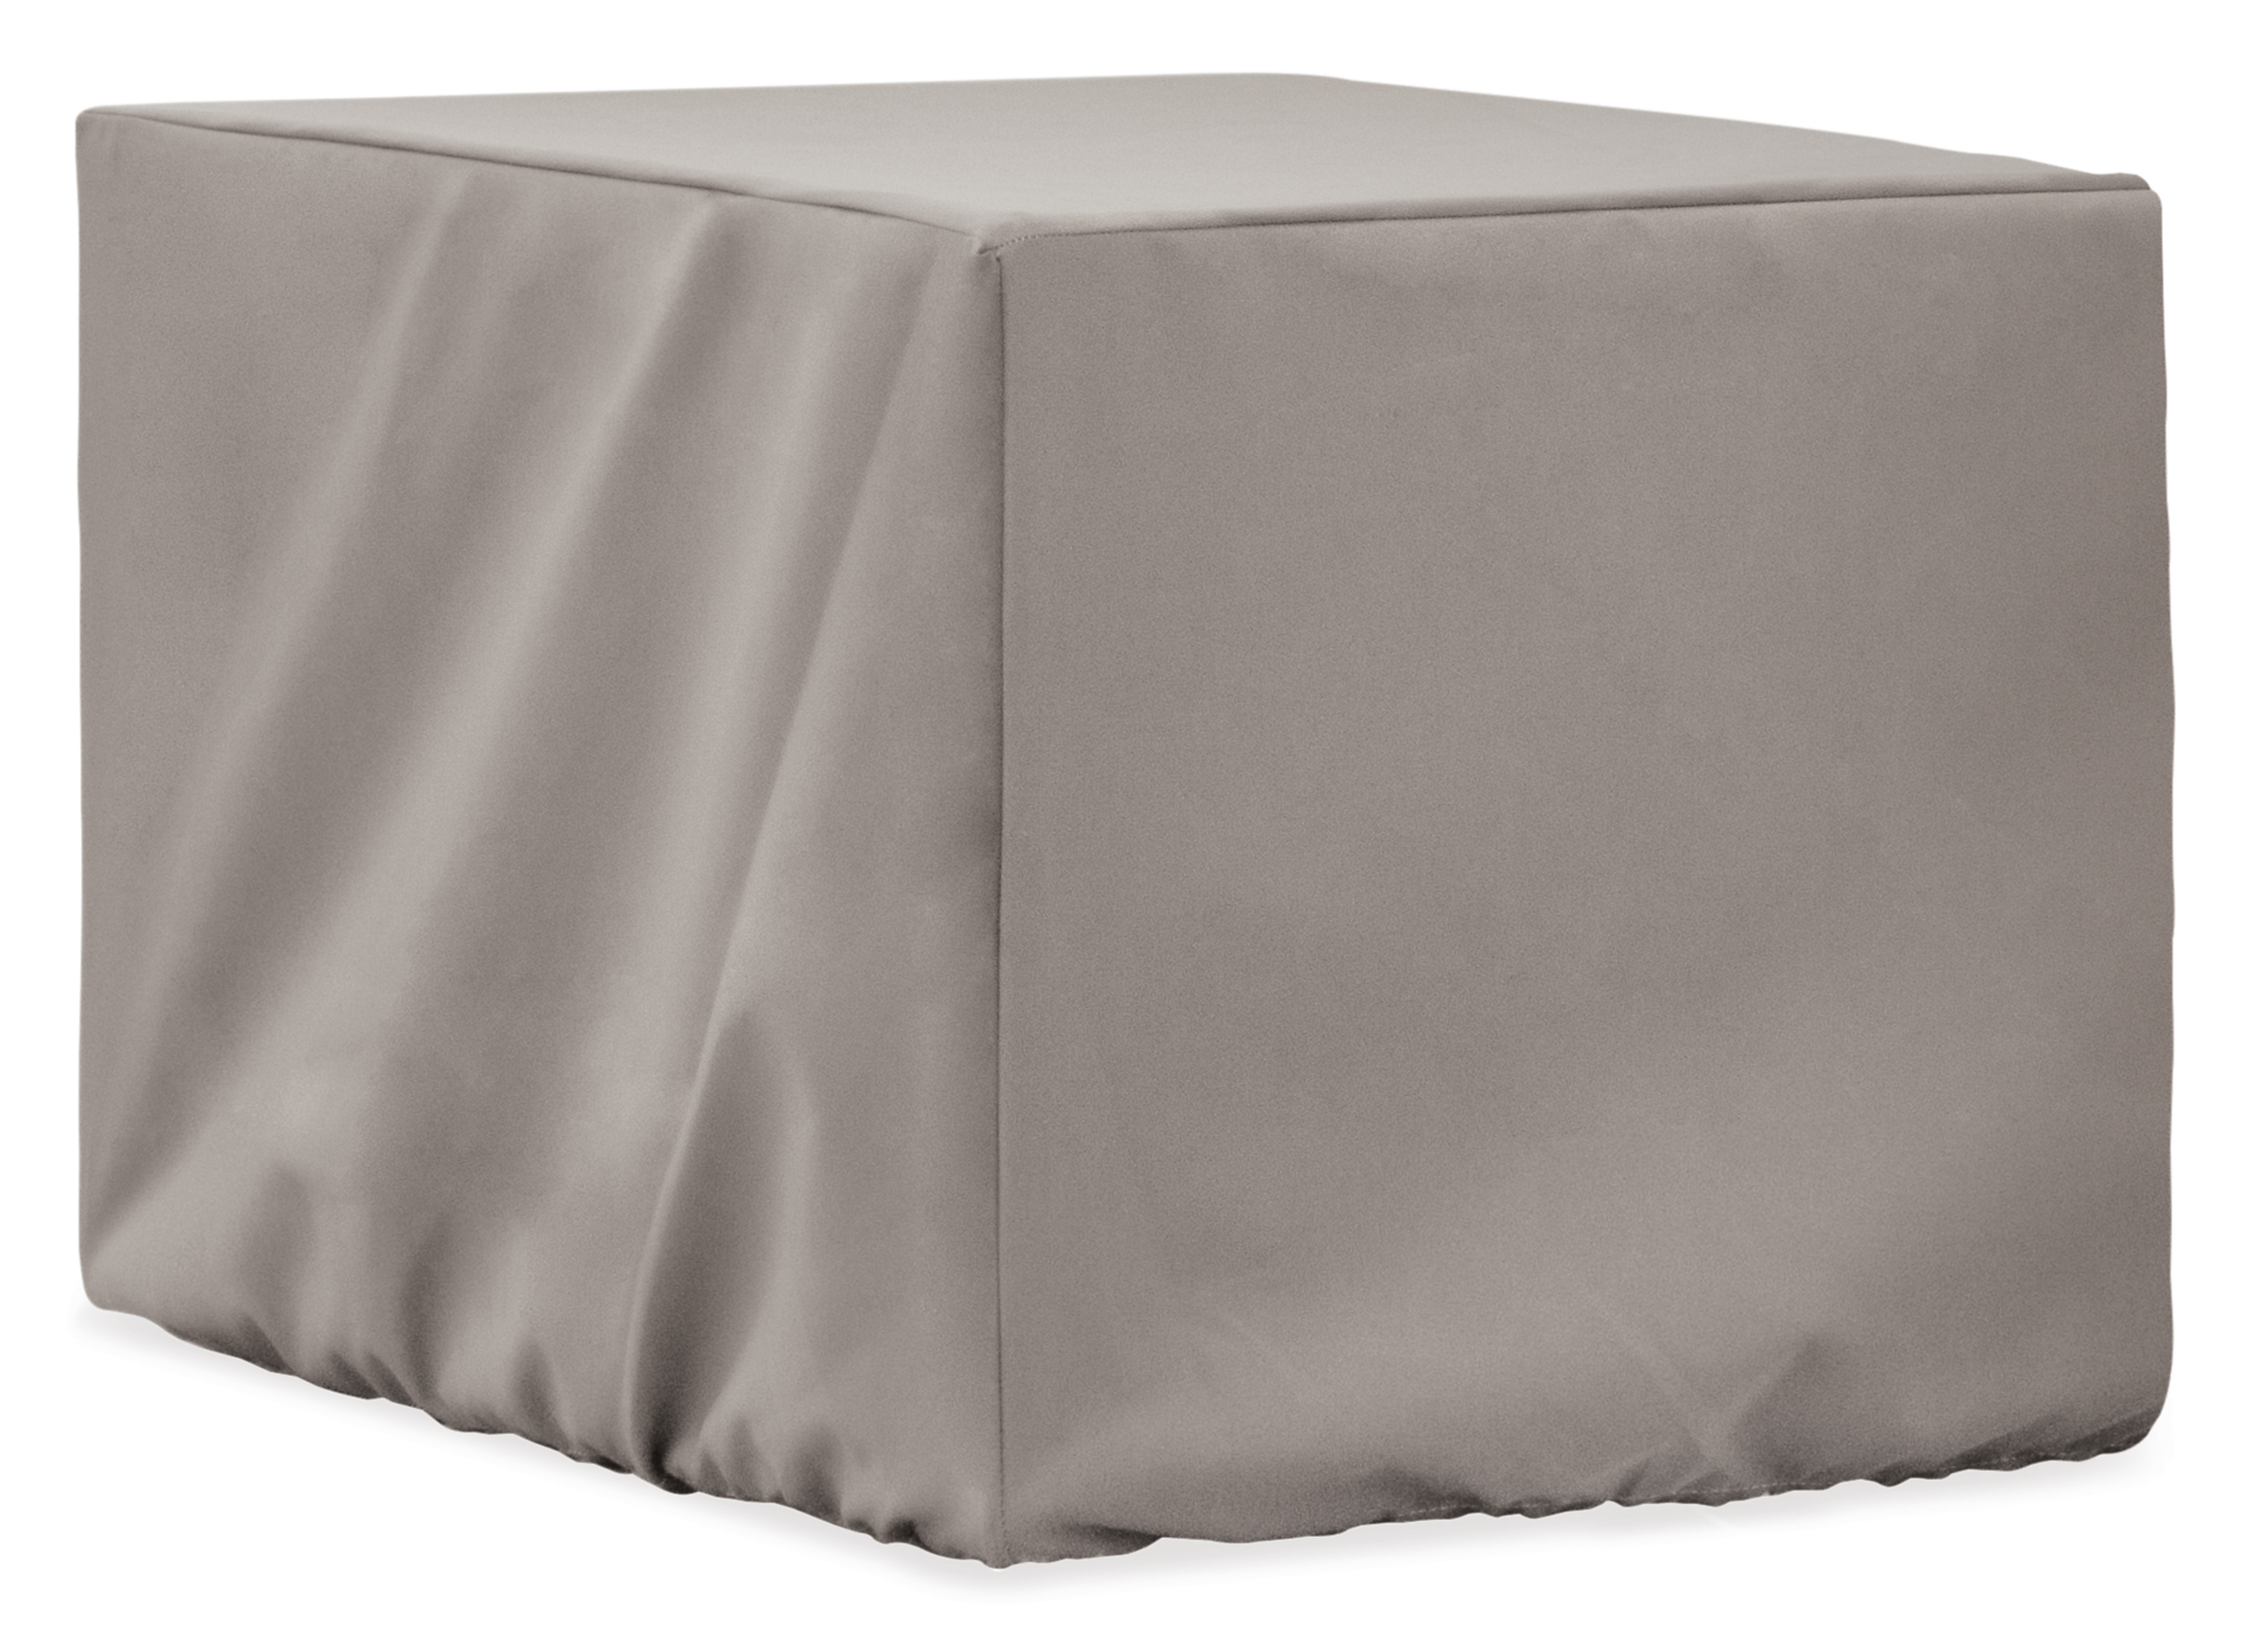 Outdoor Cover for Table 19w 19d 17h with Drawstring